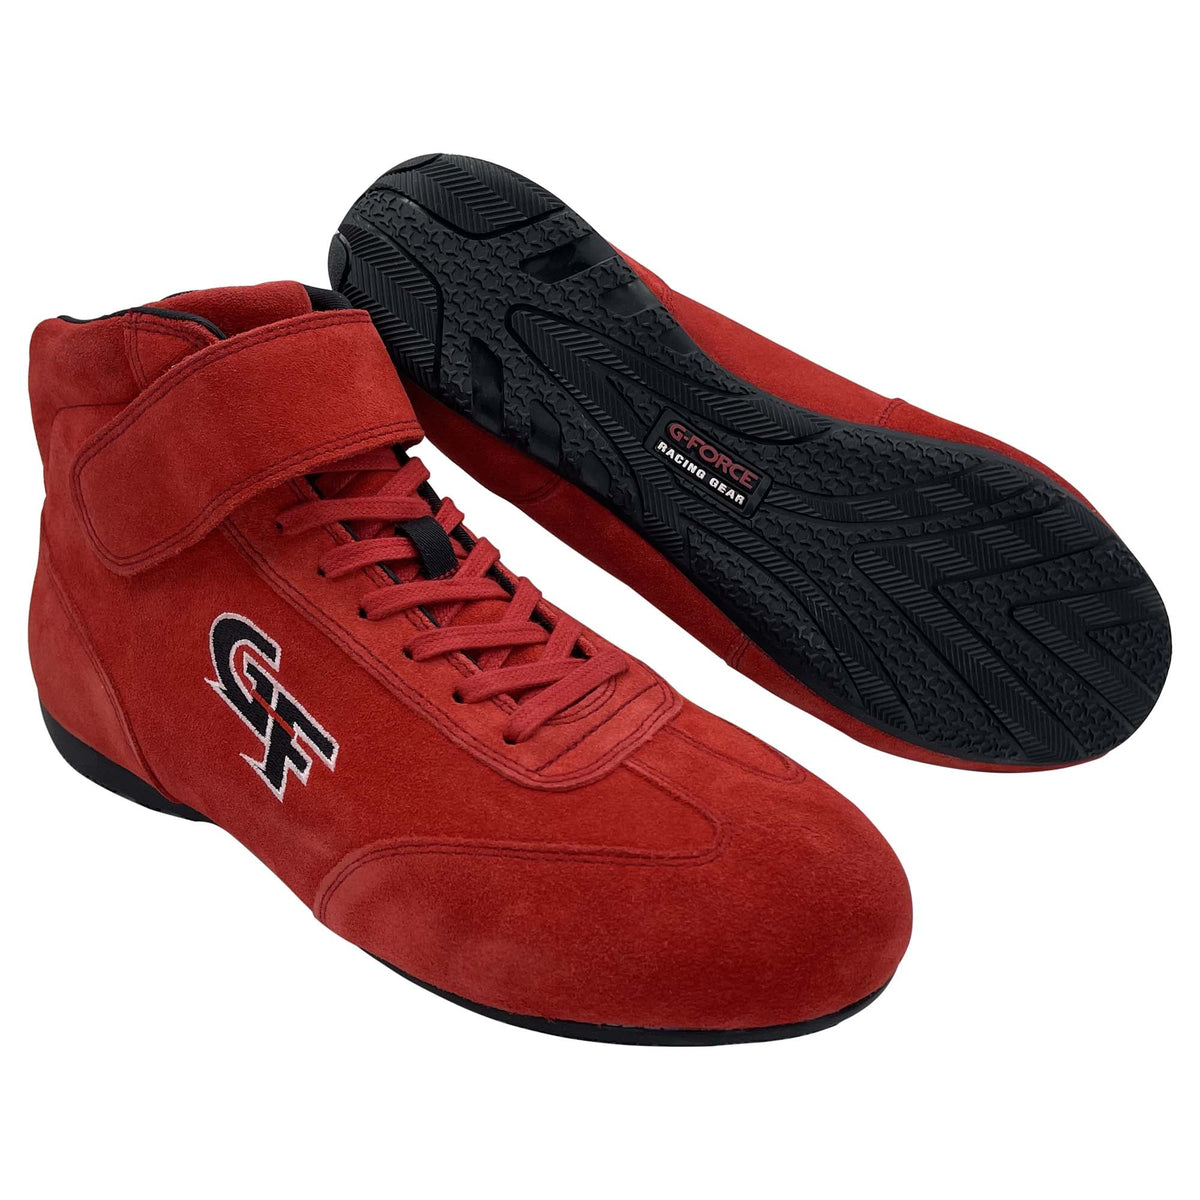 G-Force G35 Racing Shoes